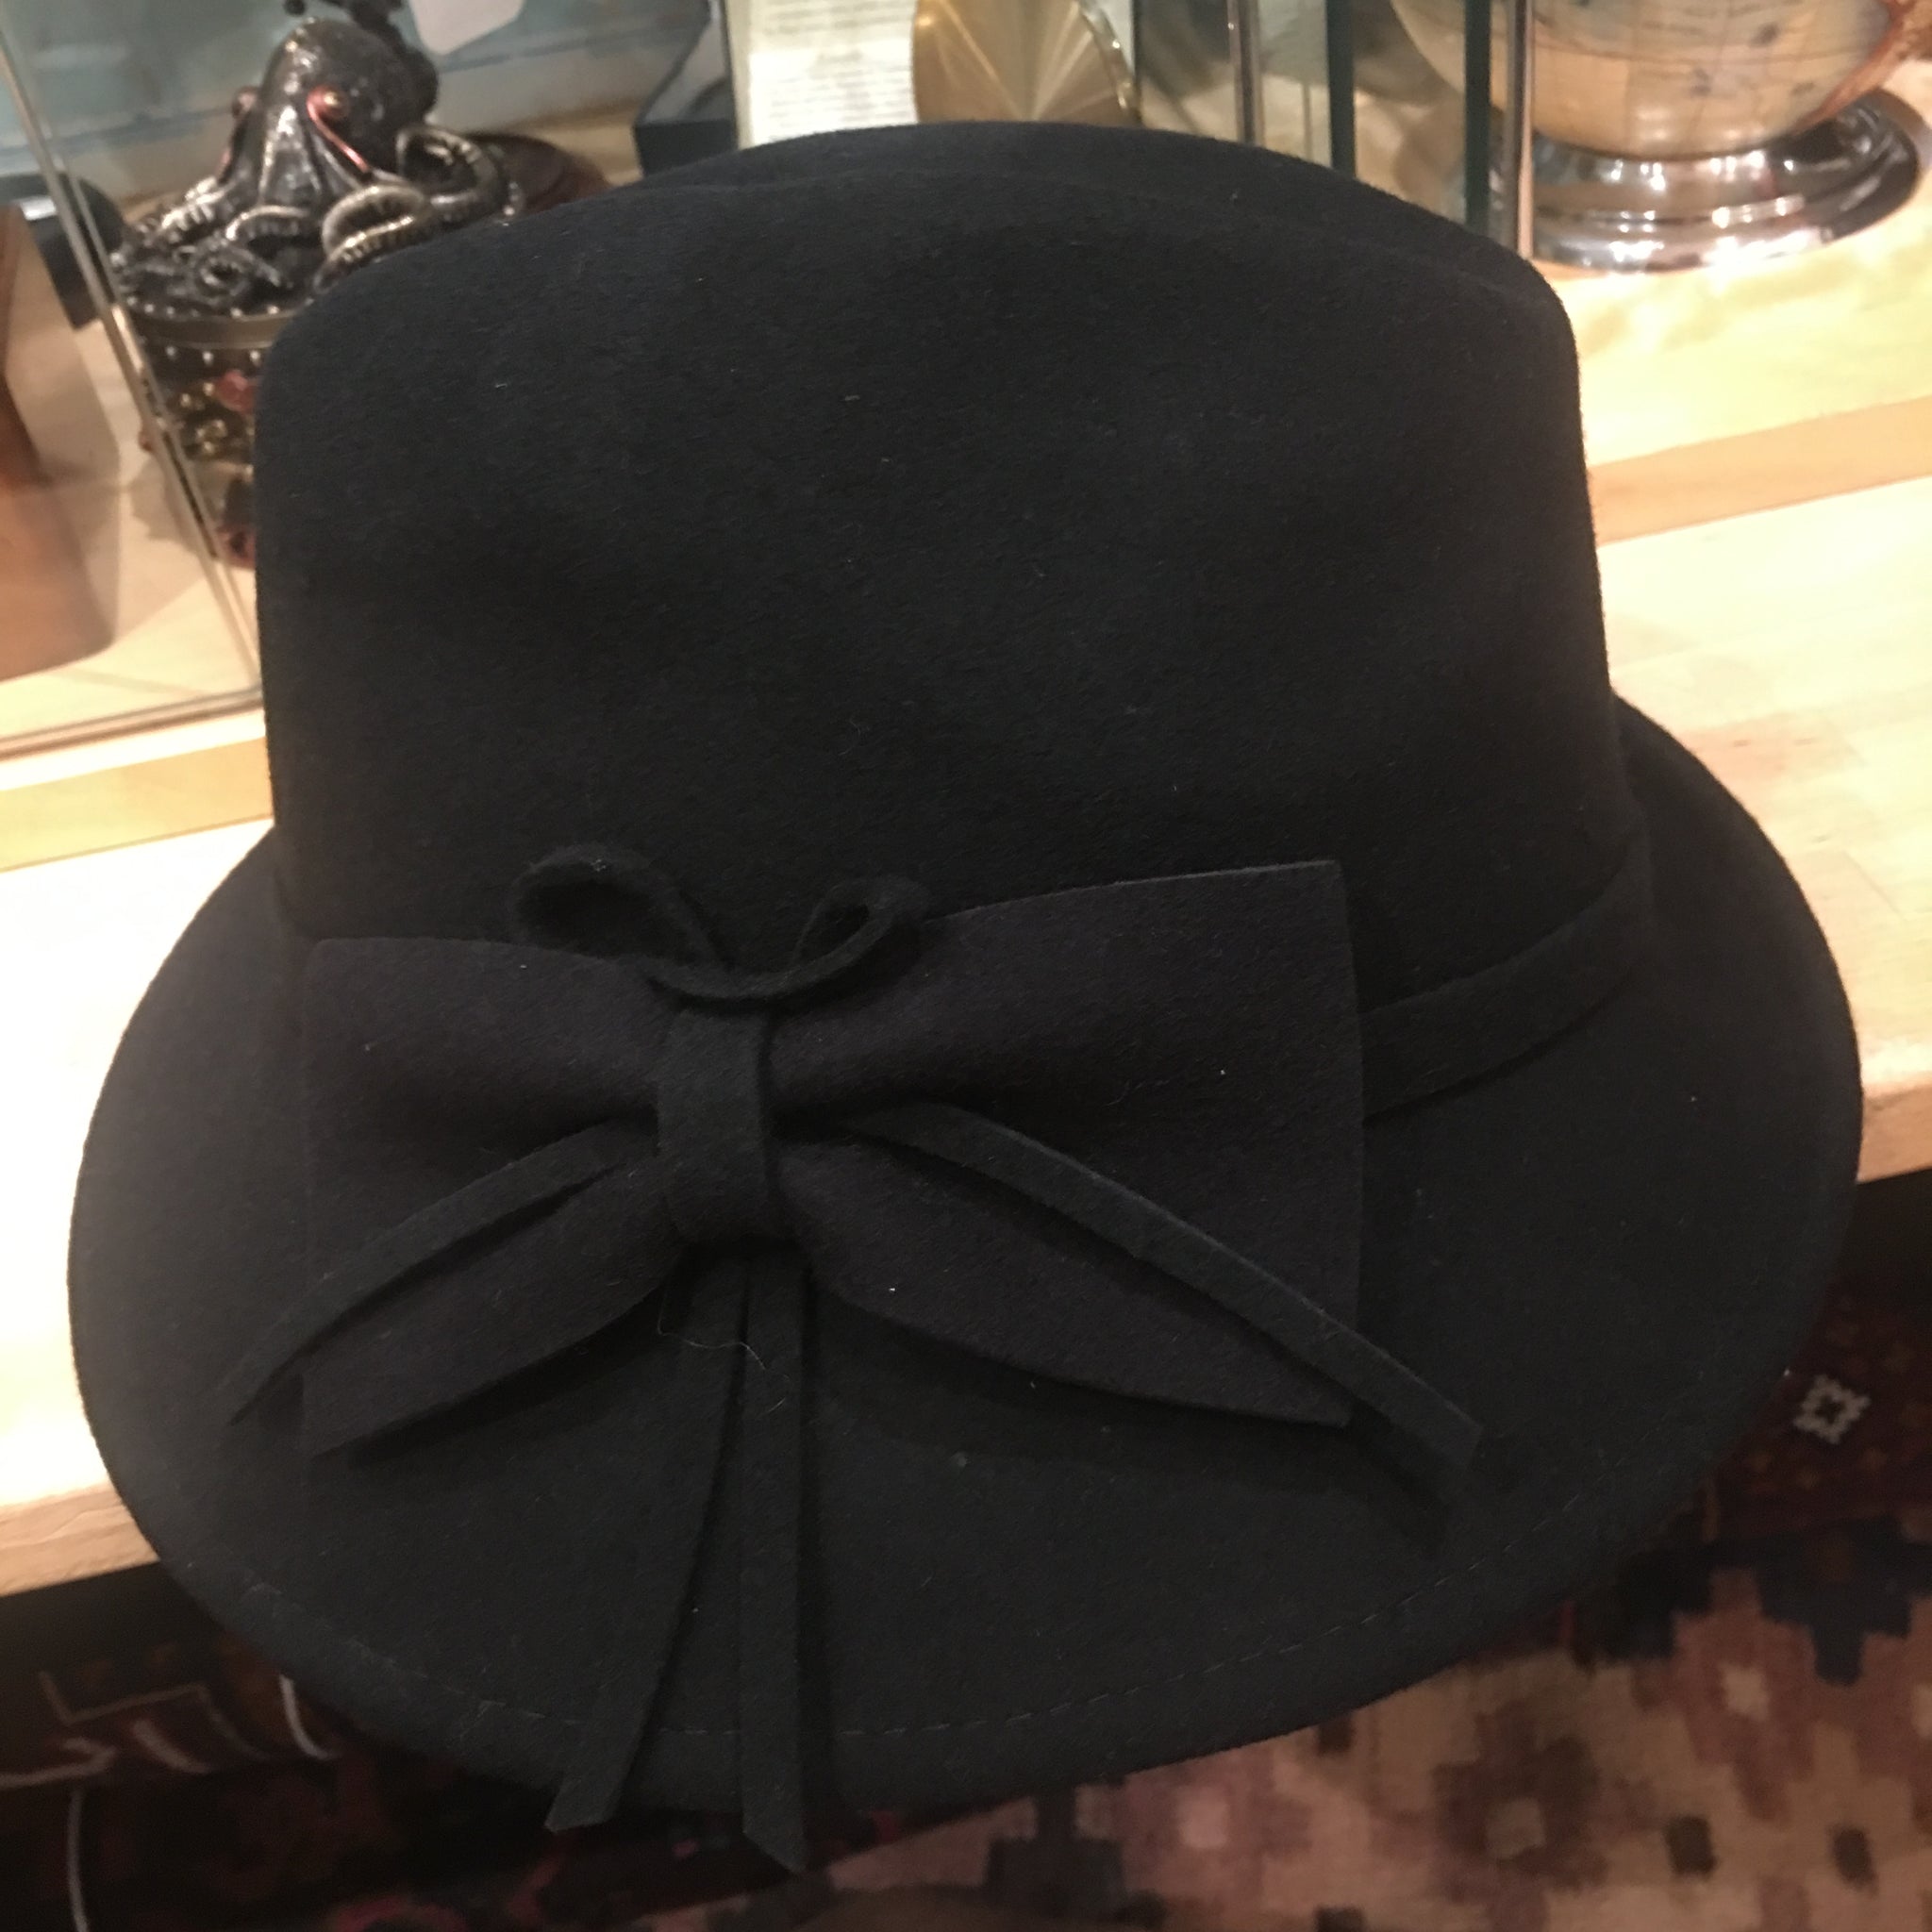 Trilby style cloche hat